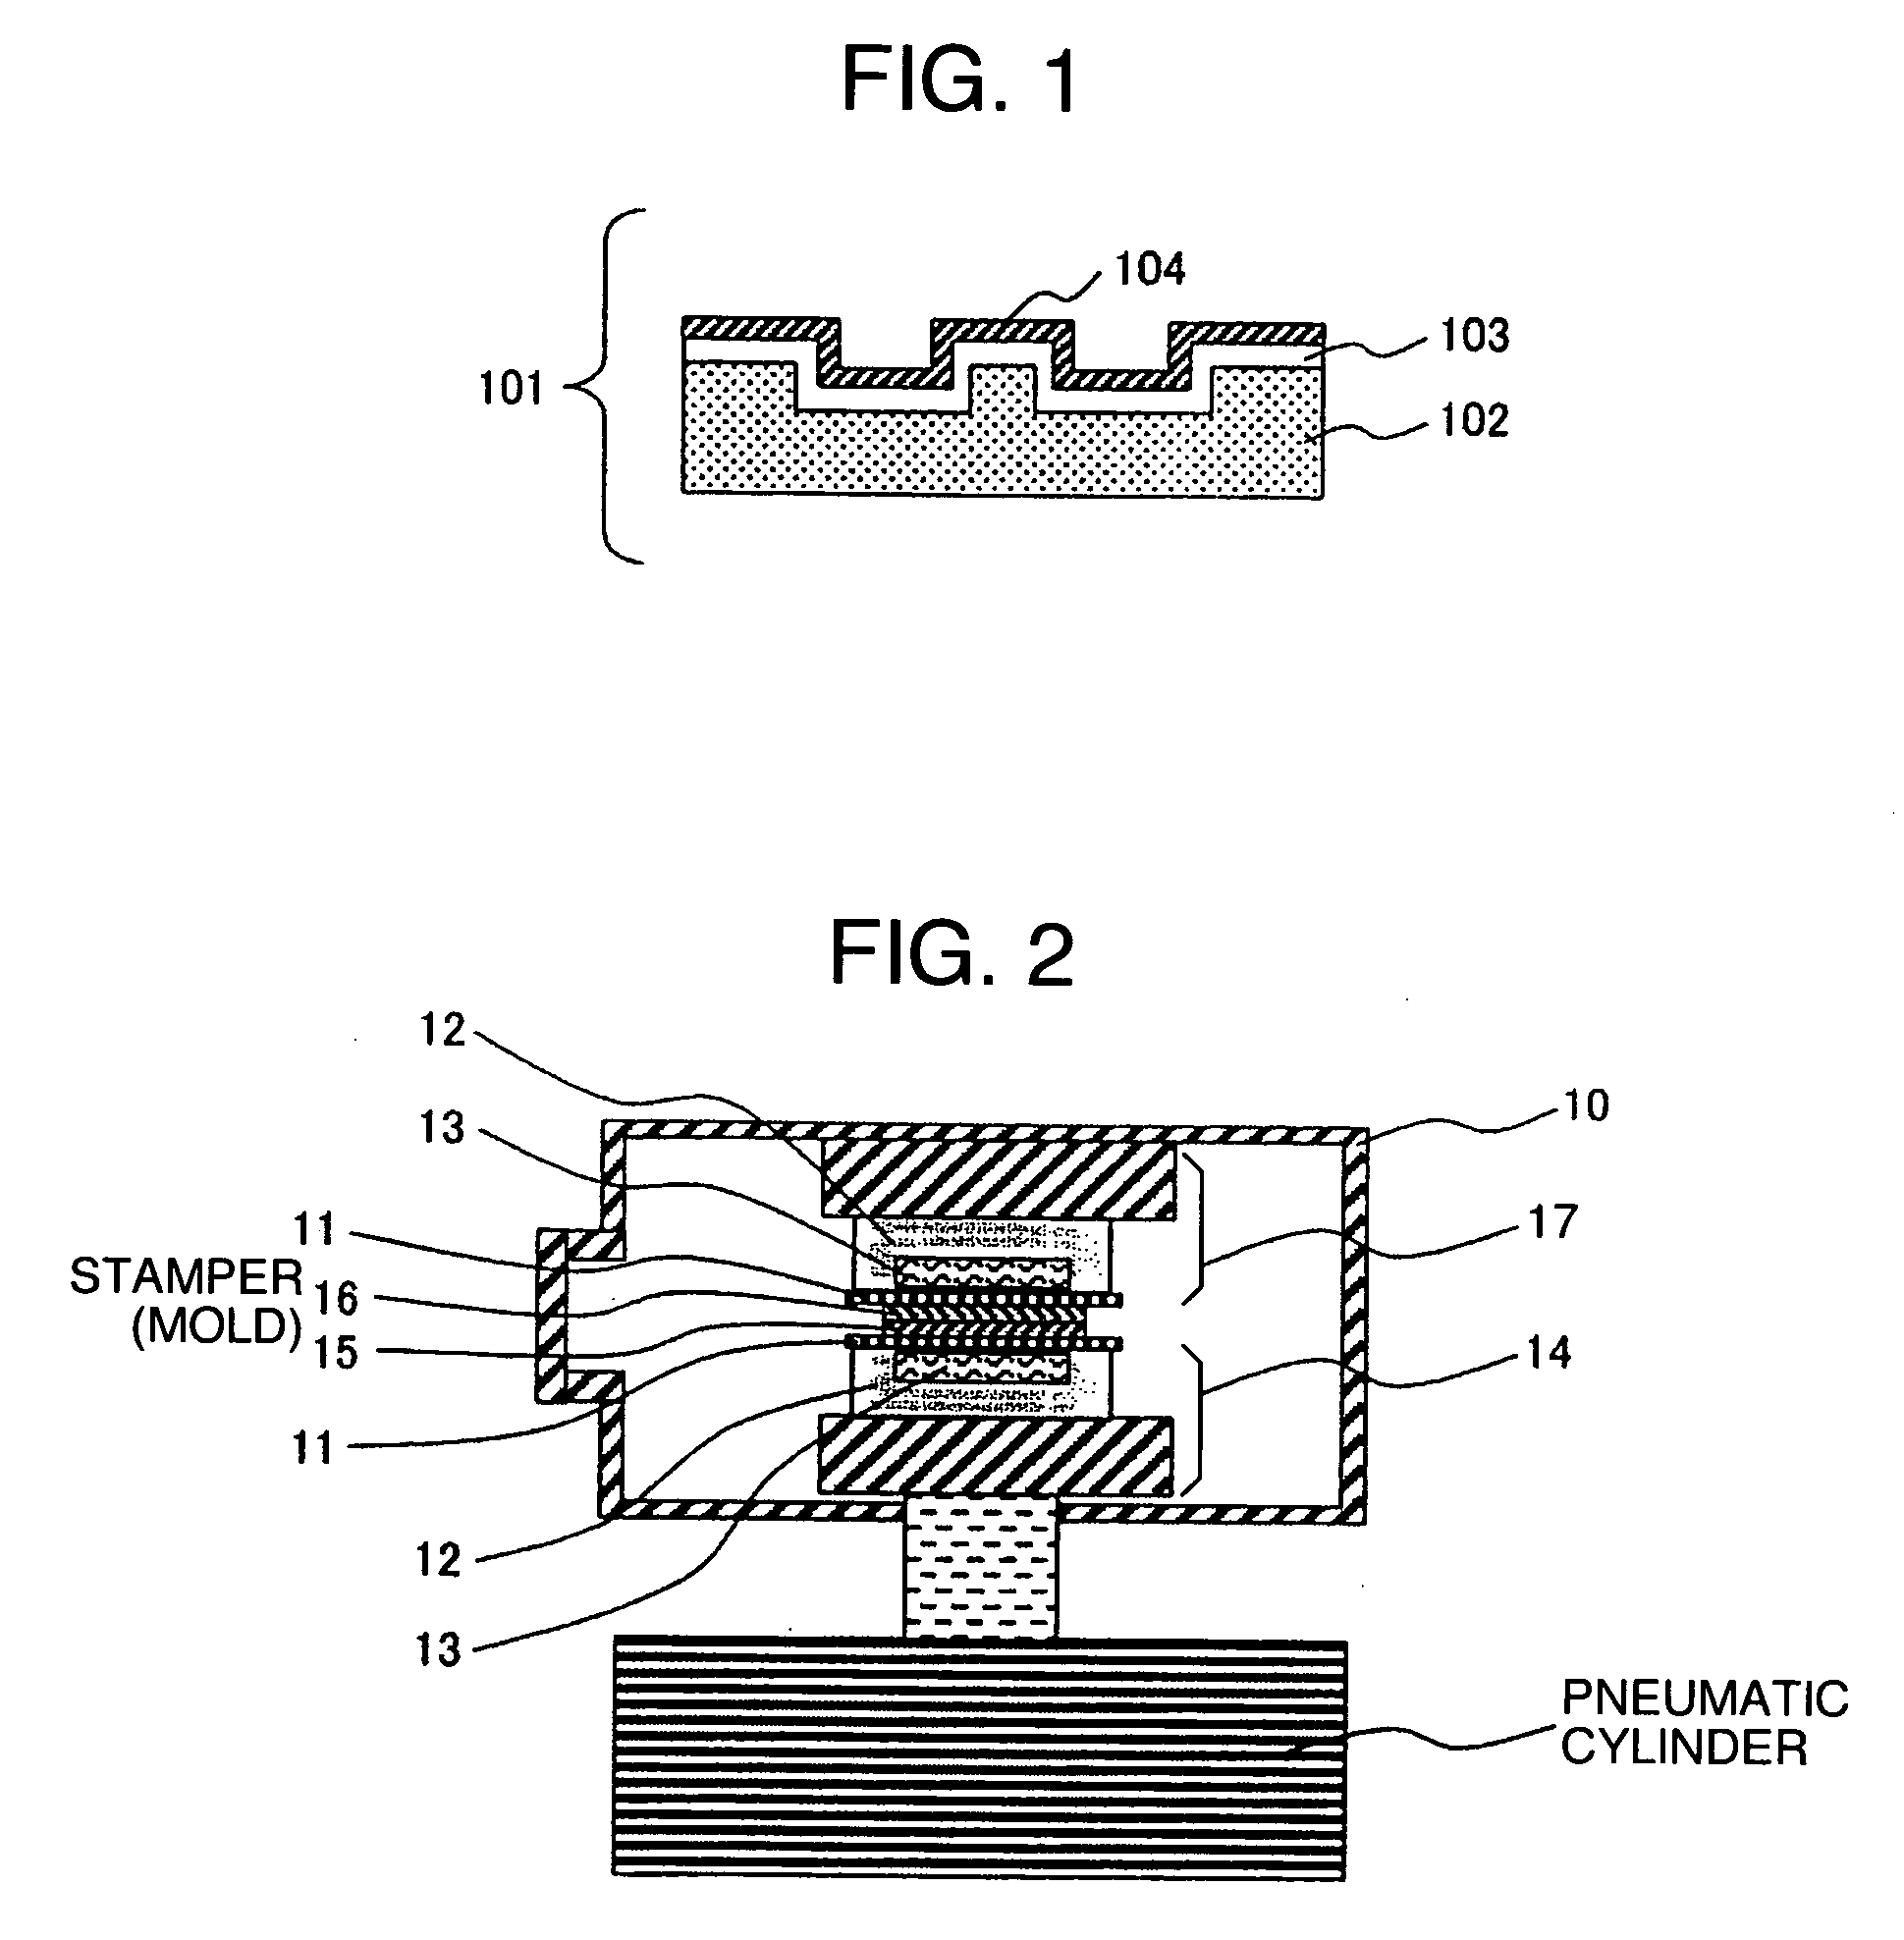 Methods of fabricating nano-scale and micro-scale mold for nano-imprint, and mold usage on nano-imprinting equipment